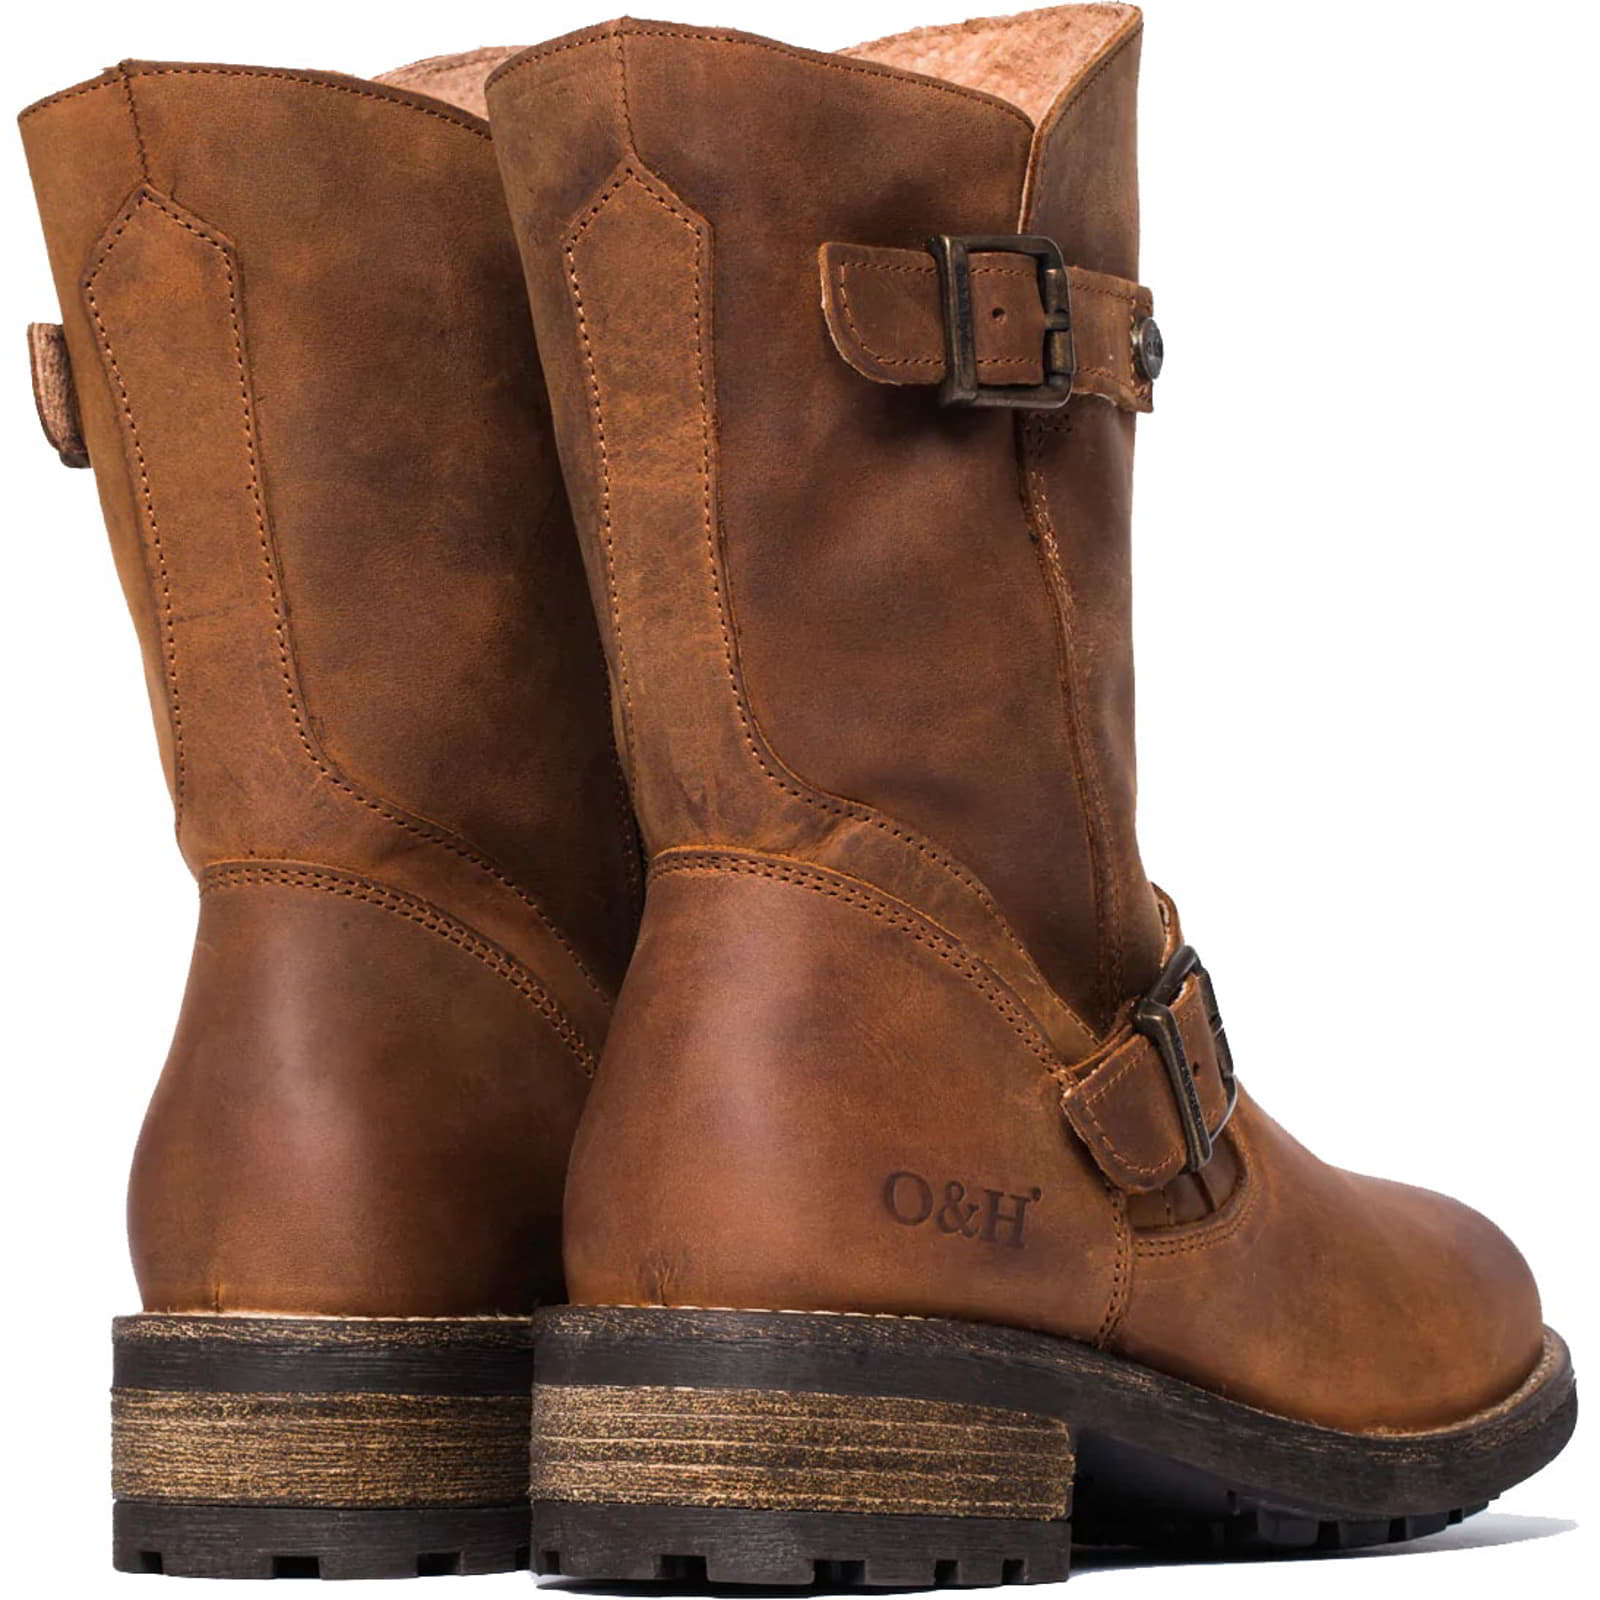 Womens Crest Demi Mid Calf Country Boots - Cognac